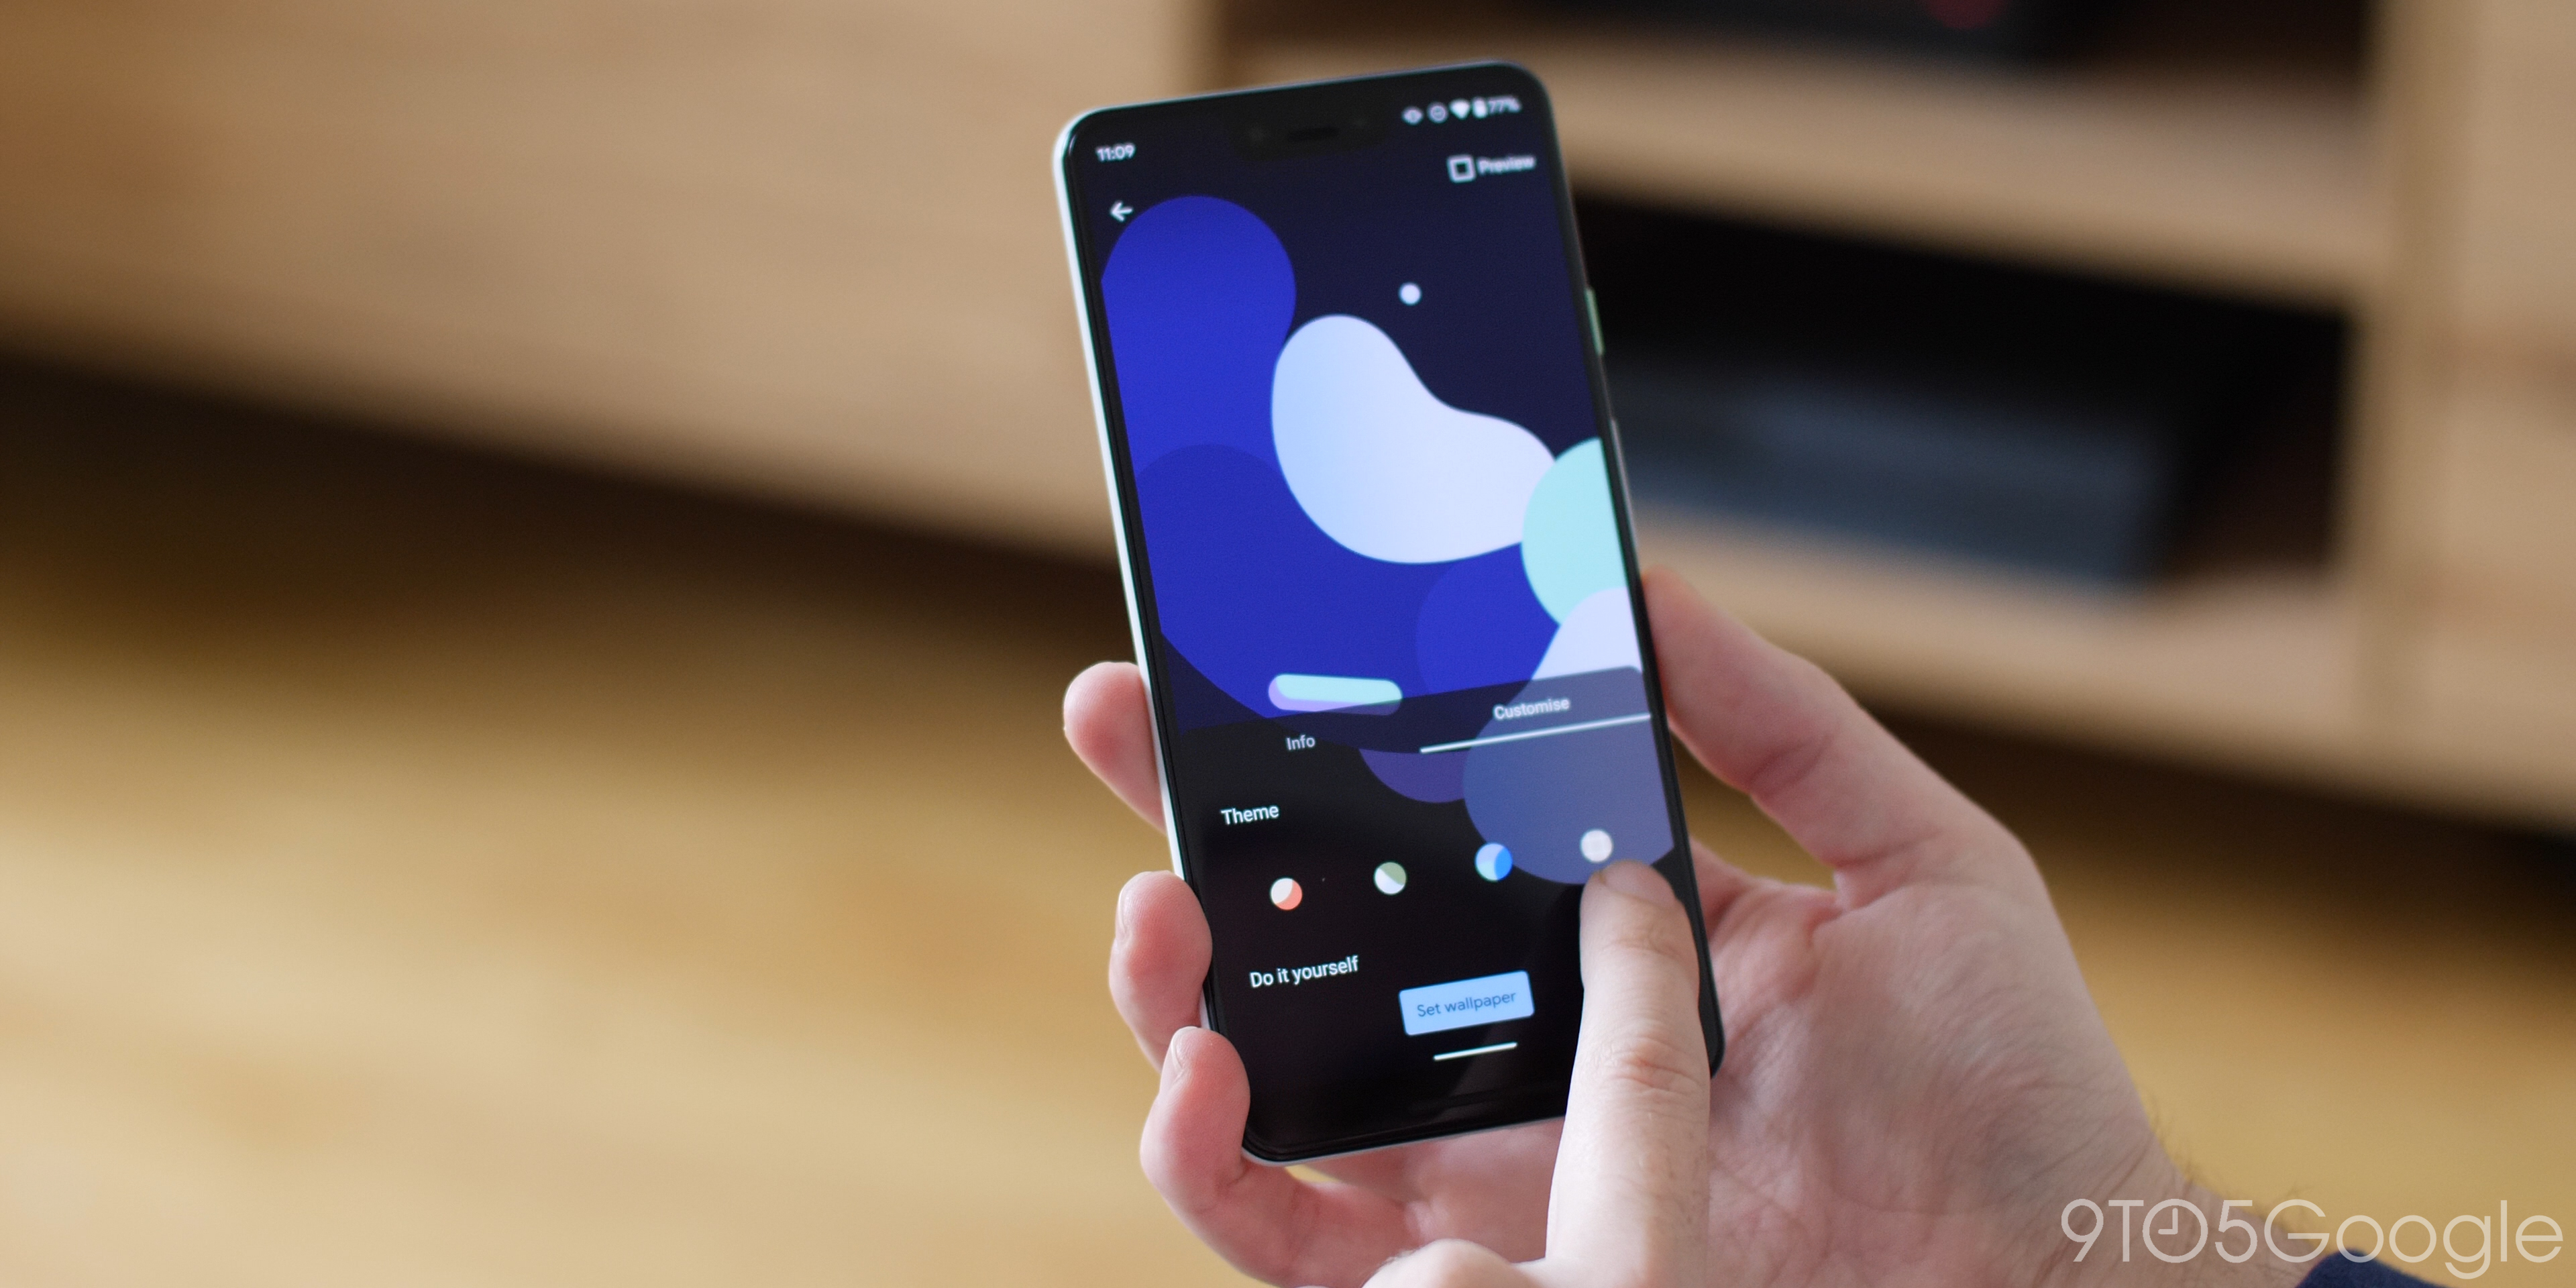 Hands-on with the new Google Pixel 4 live wallpapers [Video] - 9to5Google